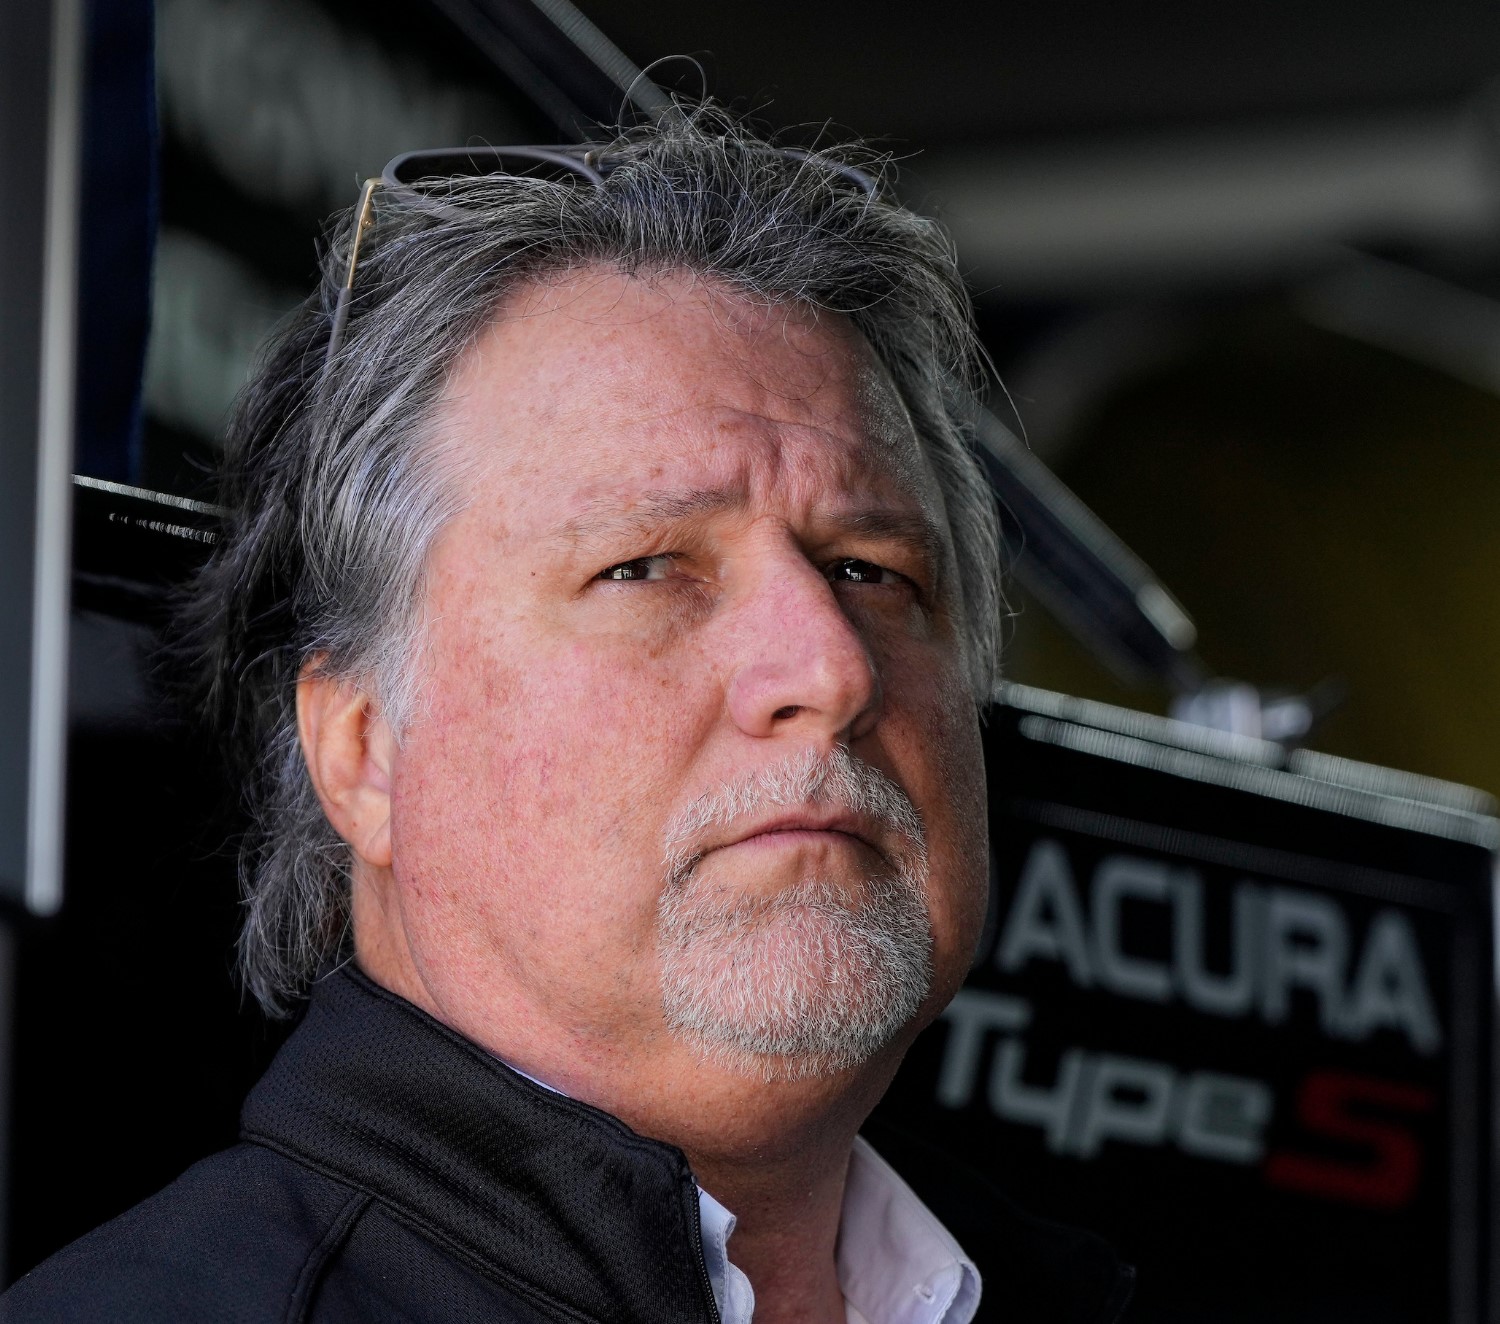 Since Szafnauer is American, will Michael Andretti ask him to join his yet to be confirmed American F1 team?